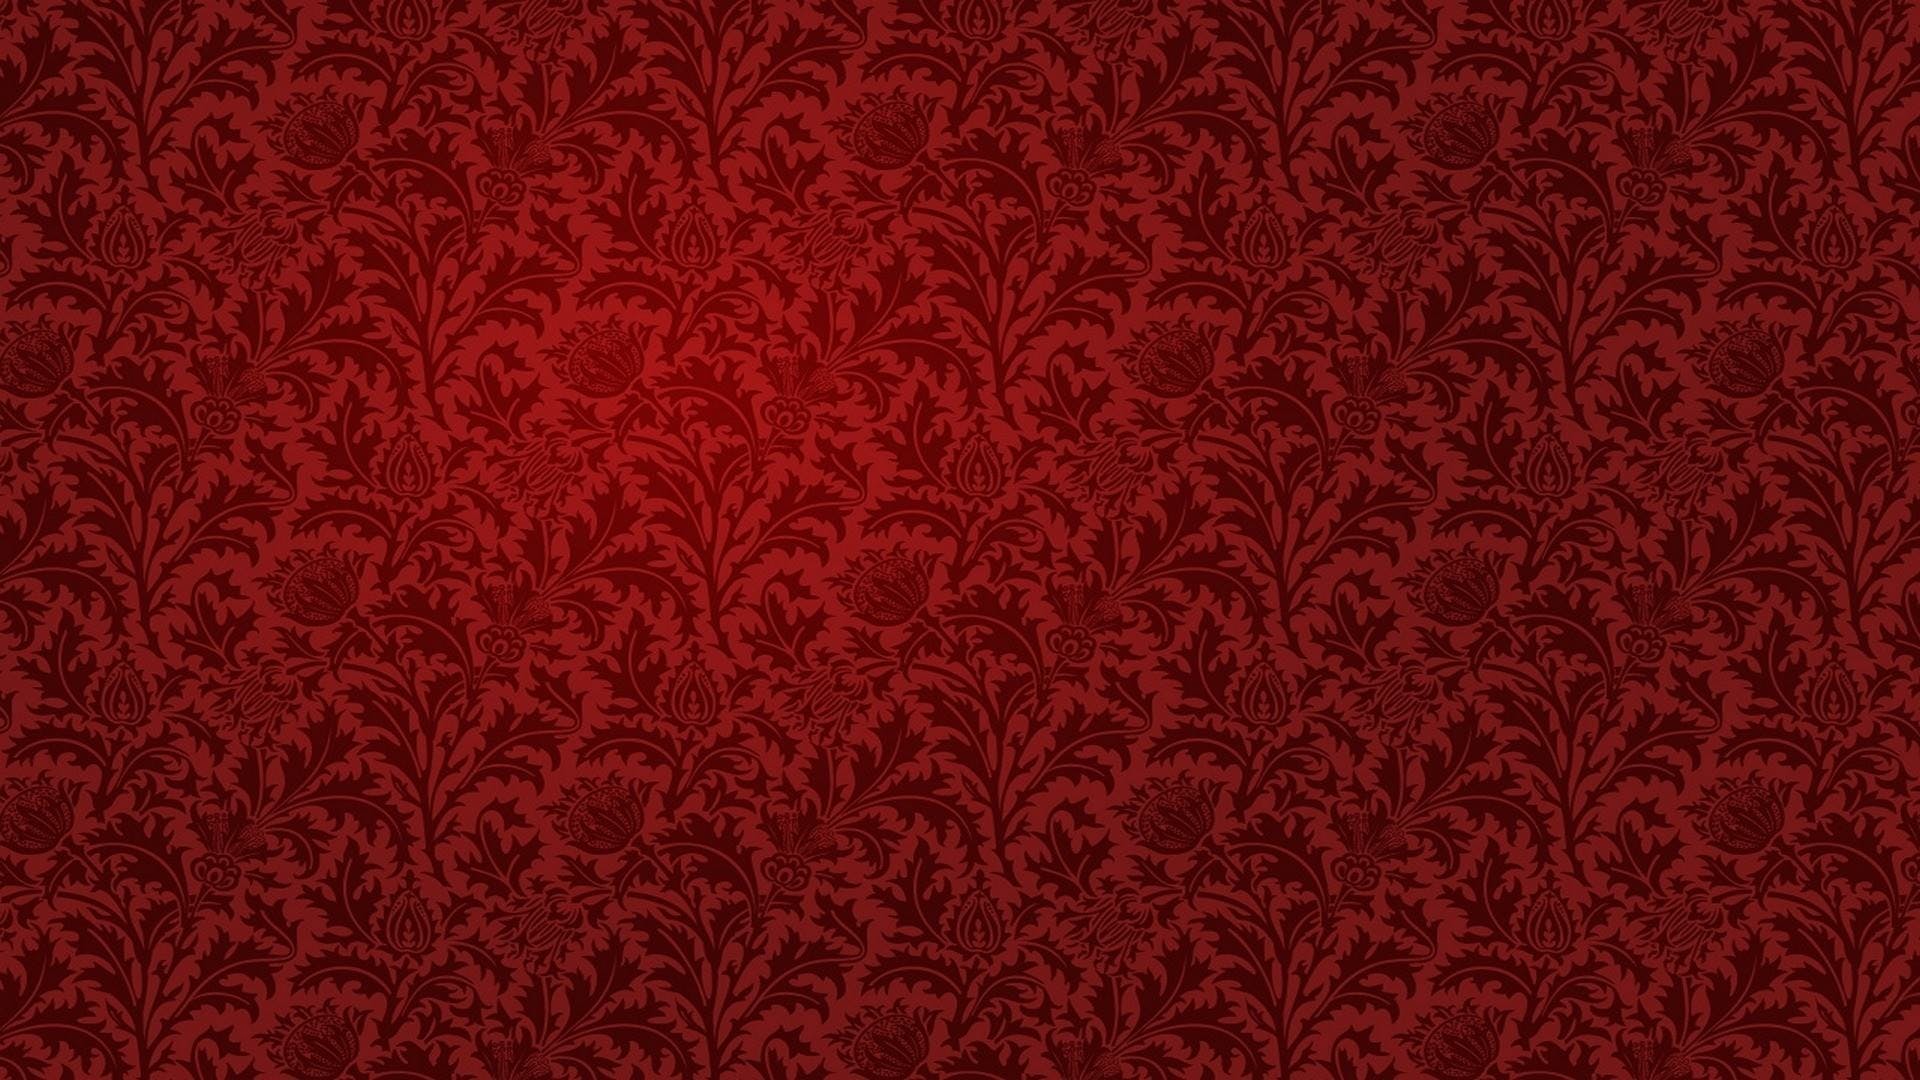 FREE Red Floral Wallpaper in PSD